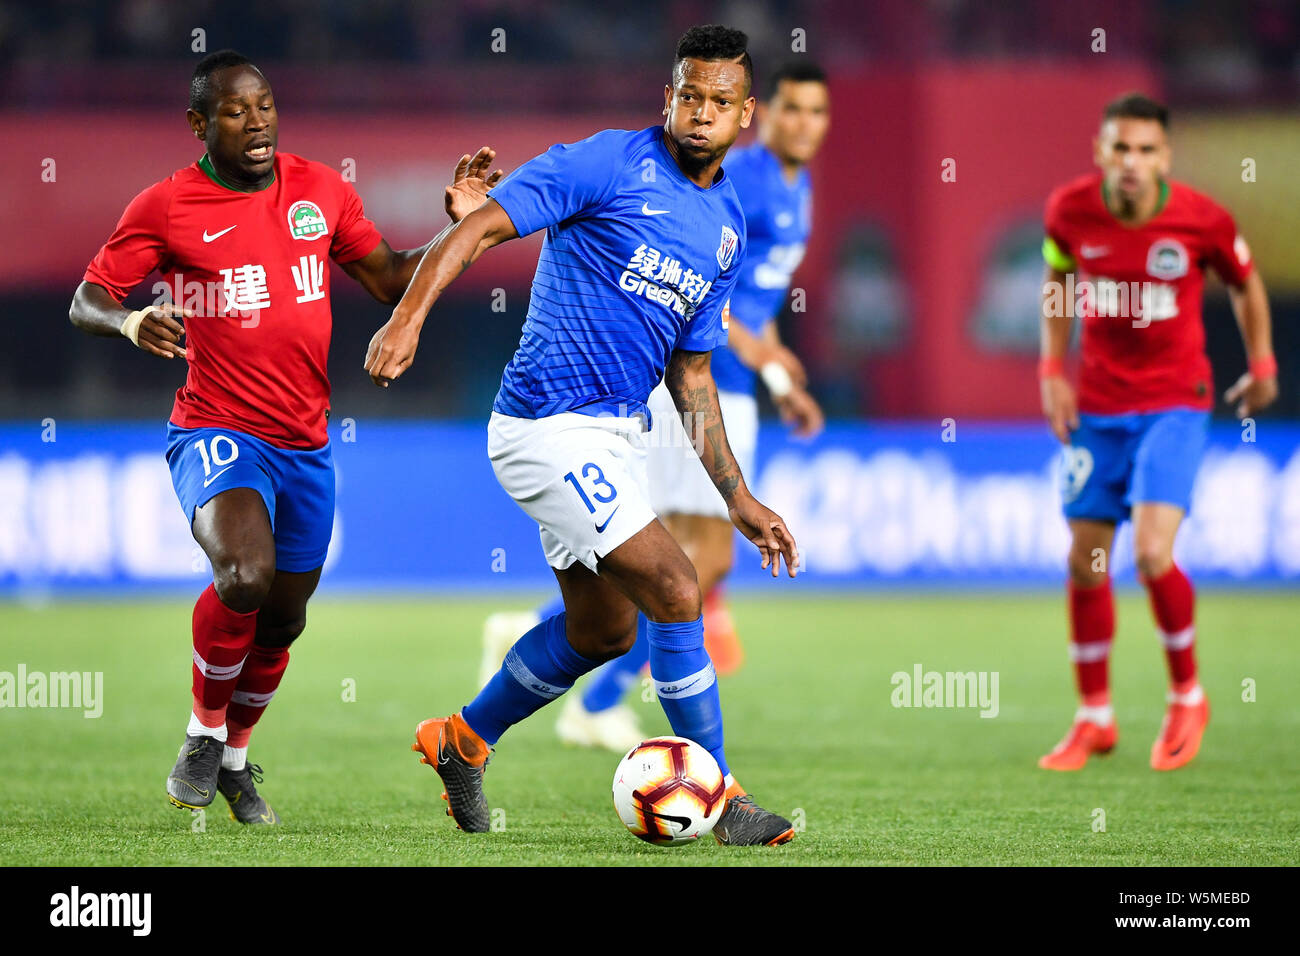 Colombian football player Fredy Guarin, right, of Shanghai Greenland Shenhua passes the ball against Cameroonian football player Christian Bassogog of Stock Photo